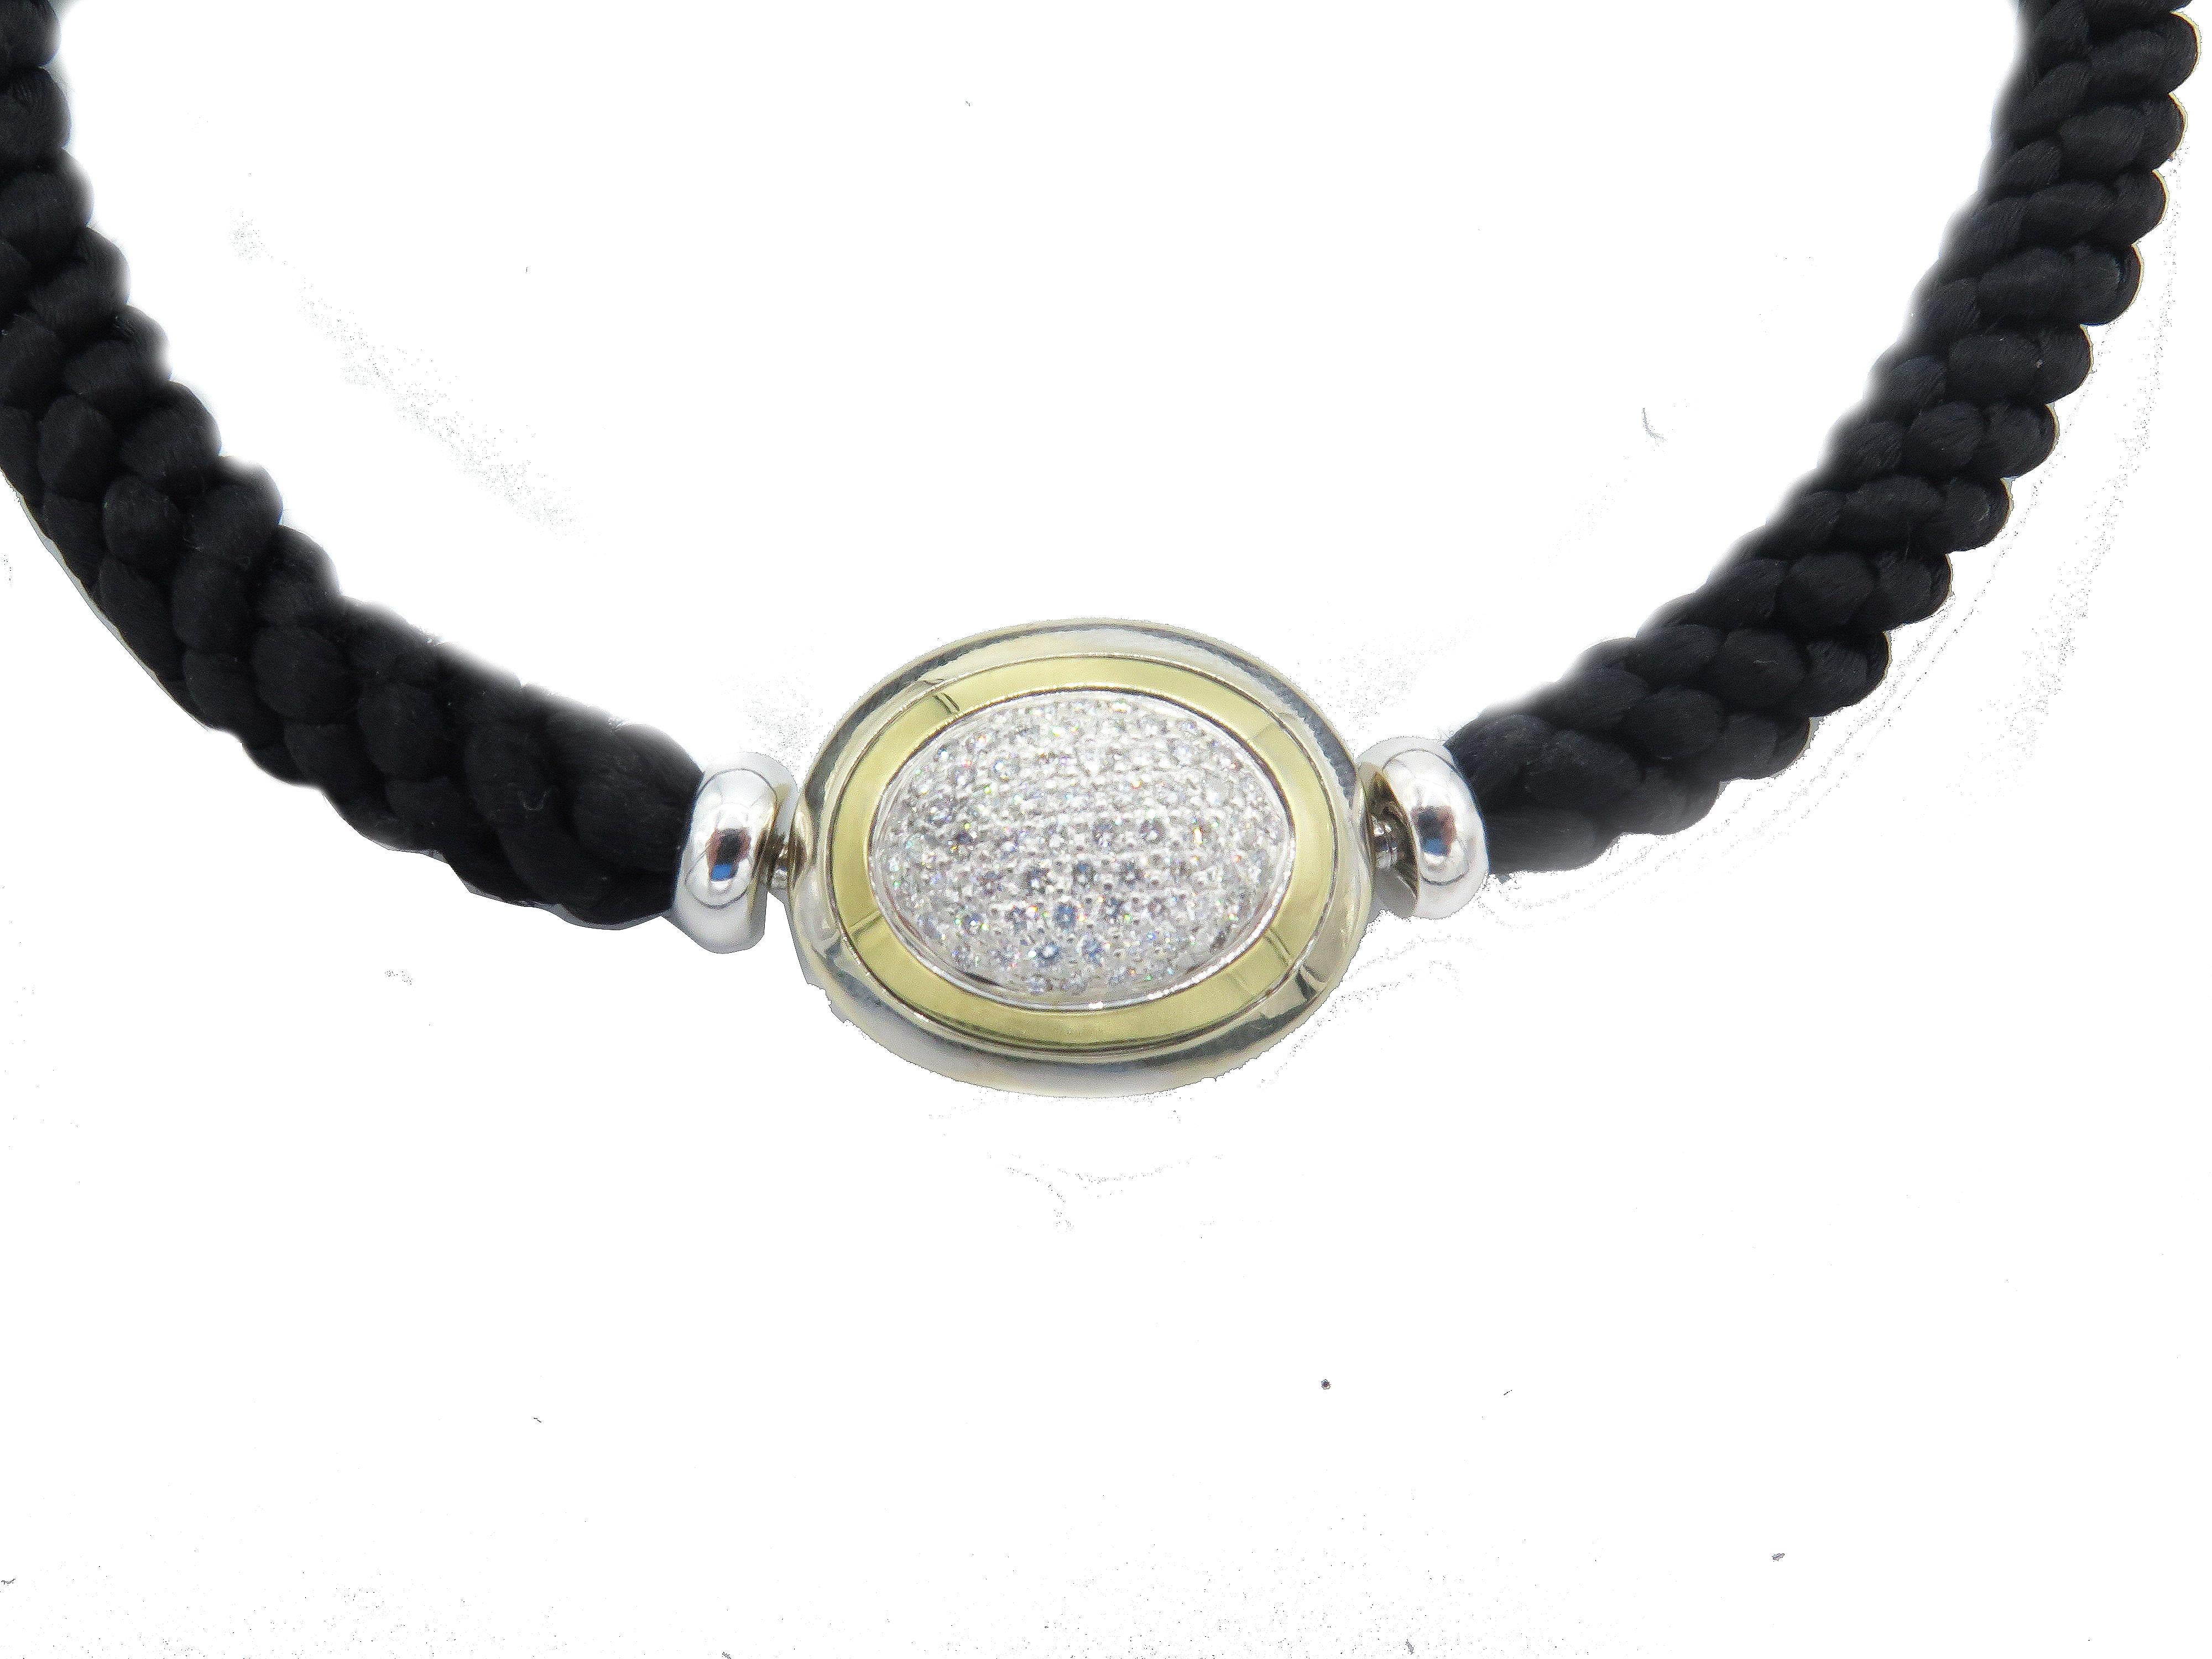  Crafted with the highest quality materials, this Hammerman Fine Diamond Choker is an elegant piece of neck jewelry. This luxurious cord necklace measures 15.75 inches in length and the width/thickness is 0.25 inches. The 18k gold oval is 0.75in